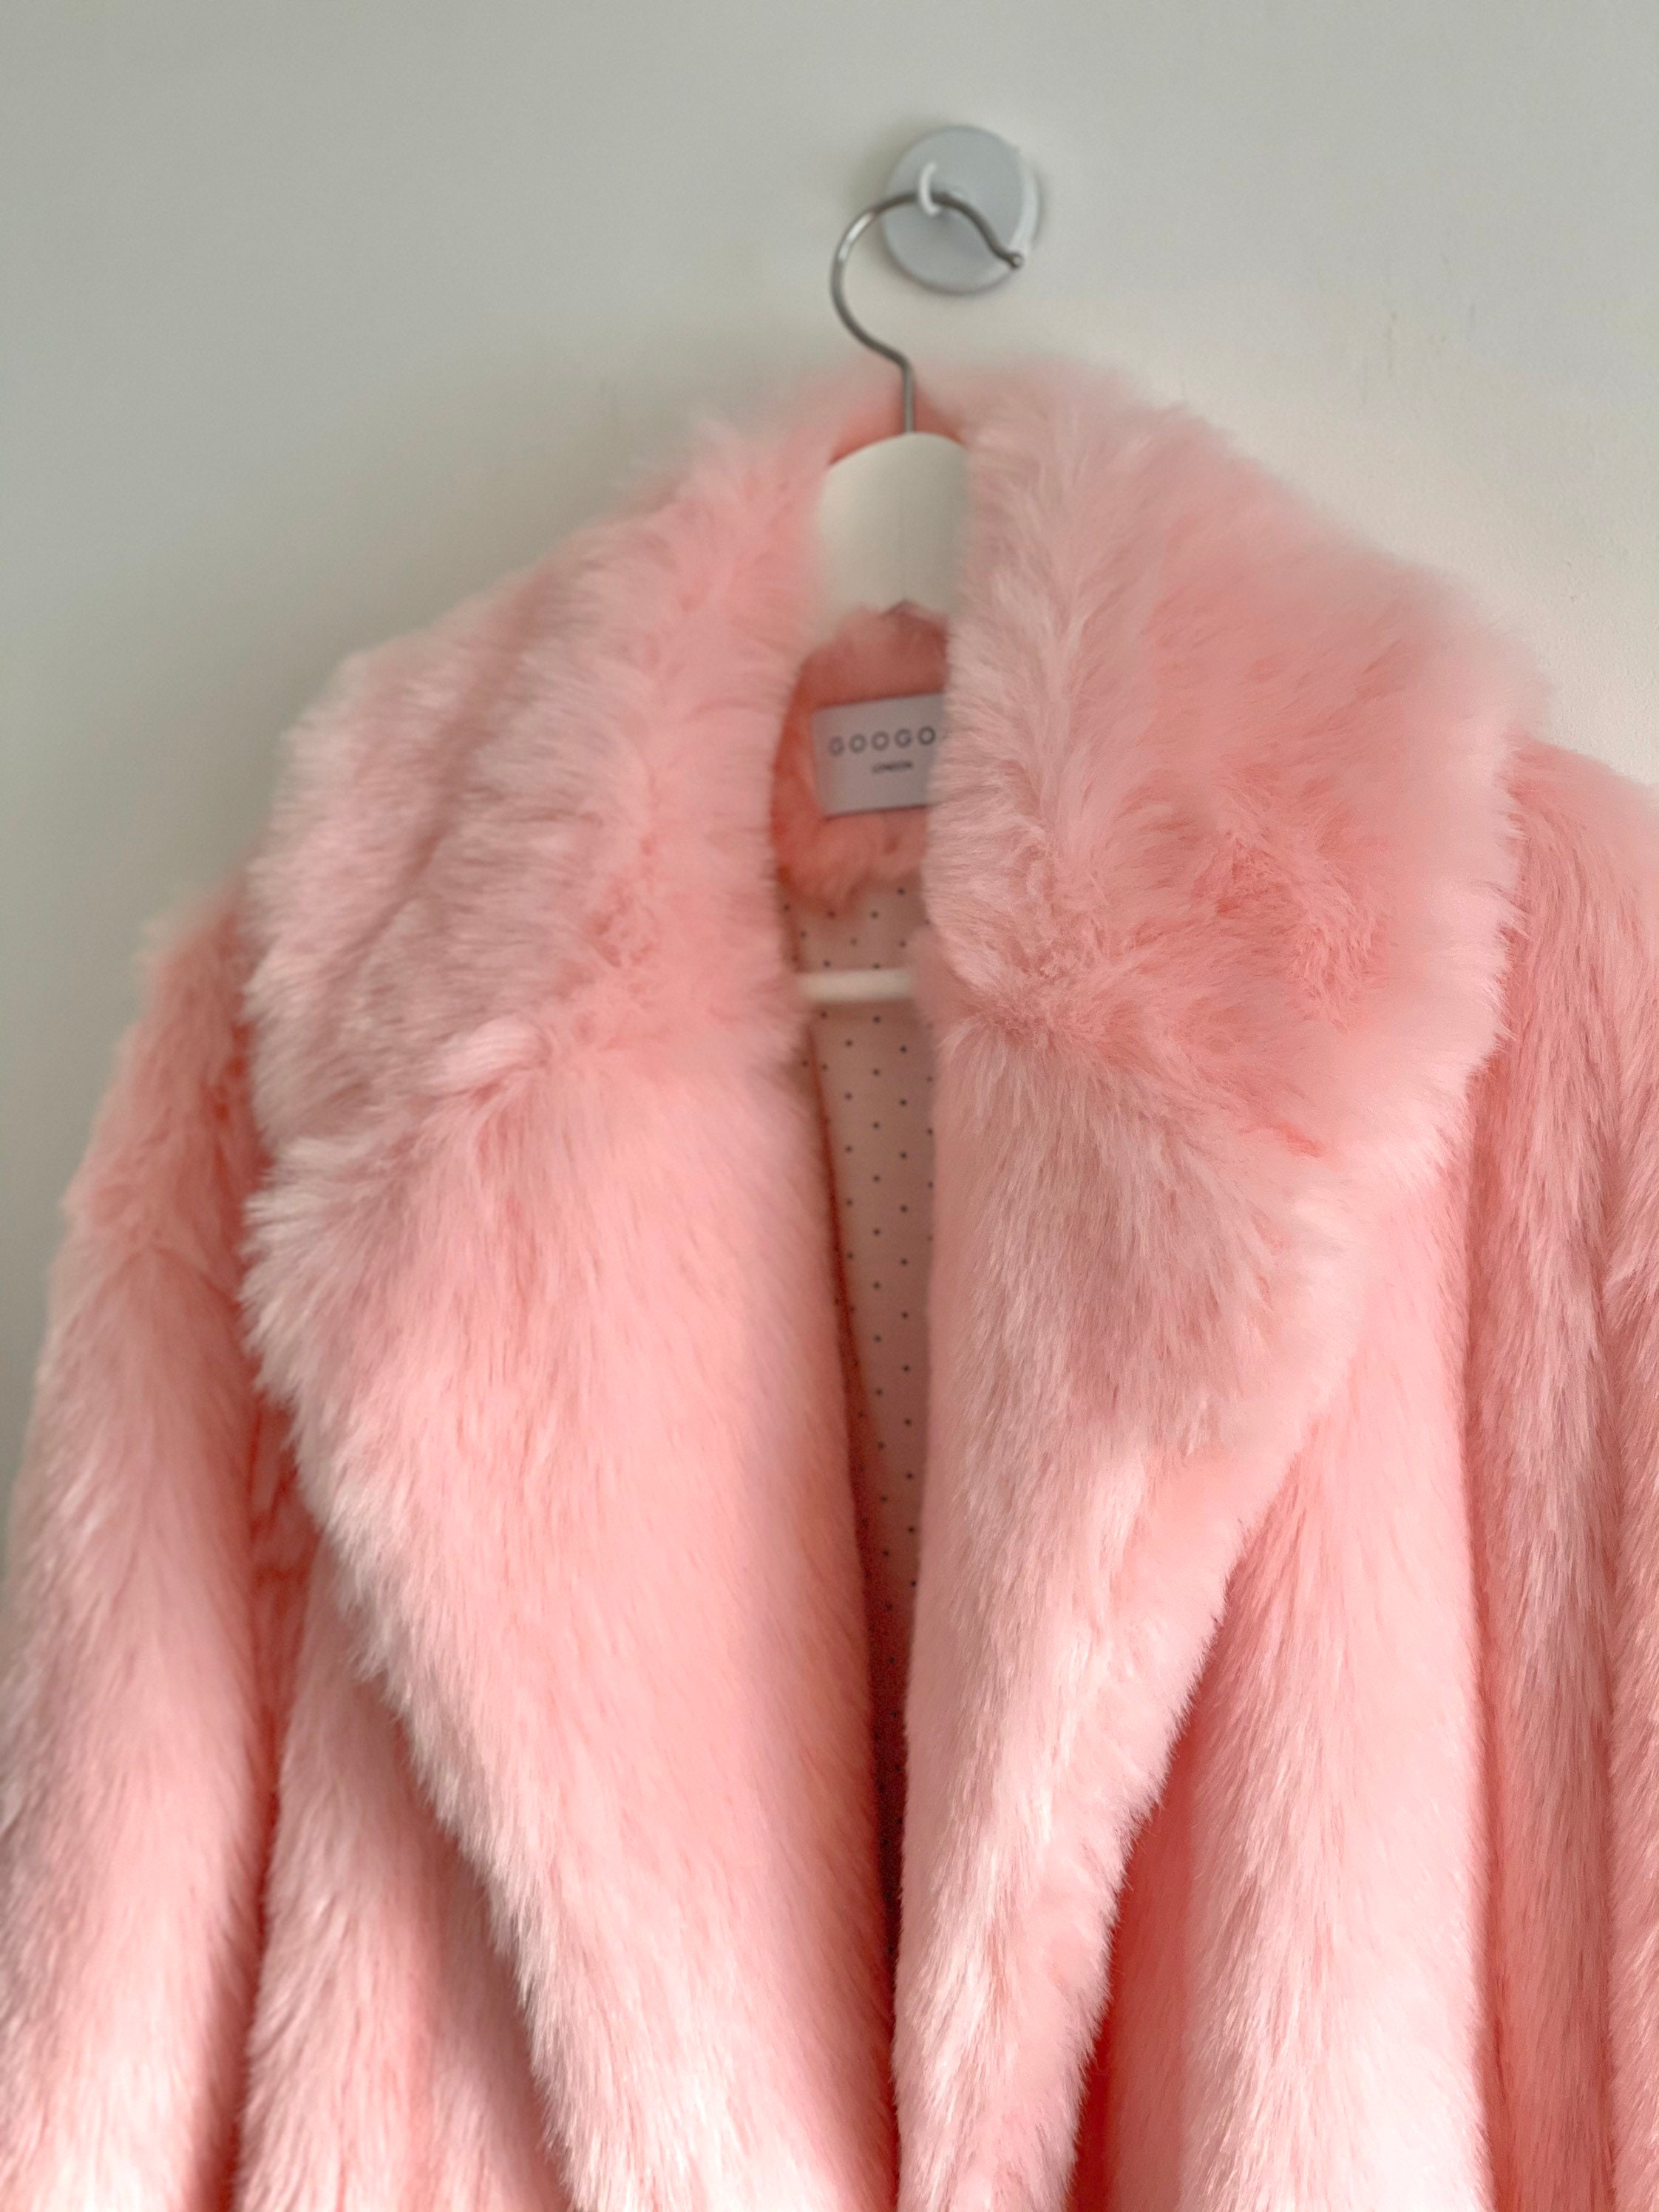 Hooded Cardigan for Babies, Faux Fur Lining - light pink, Baby